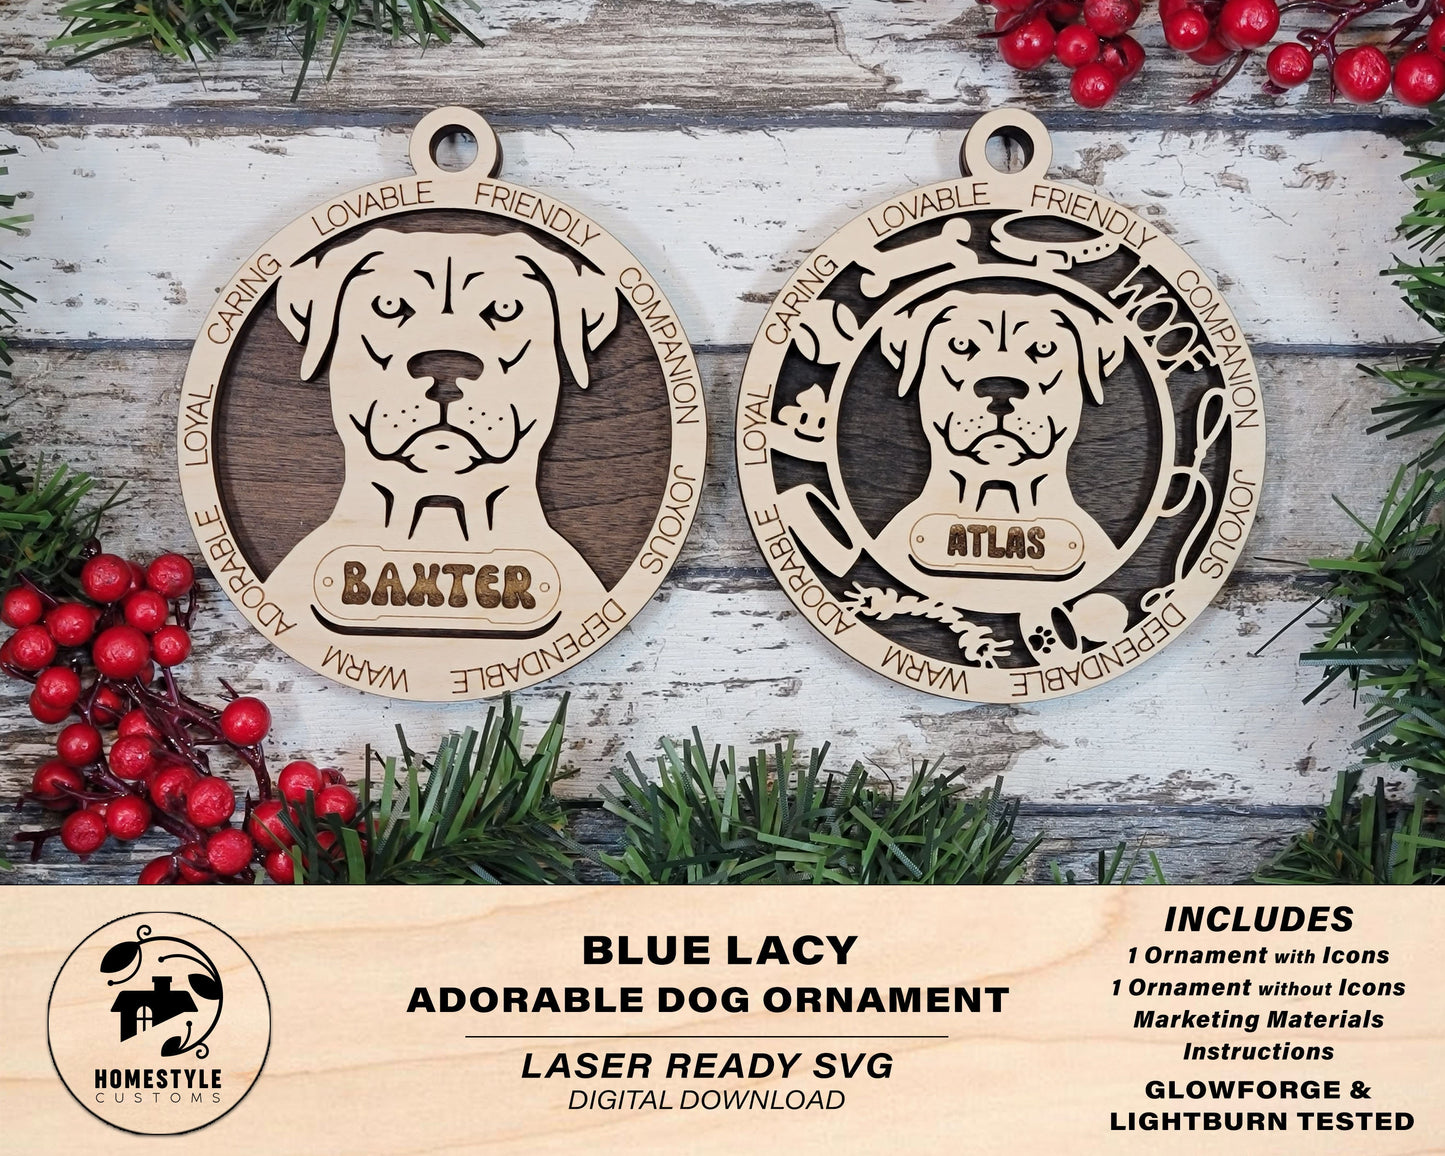 Blue Lacy - Adorable Dog Ornaments - 2 Ornaments included - SVG, PDF, AI File Download - Sized for Glowforge